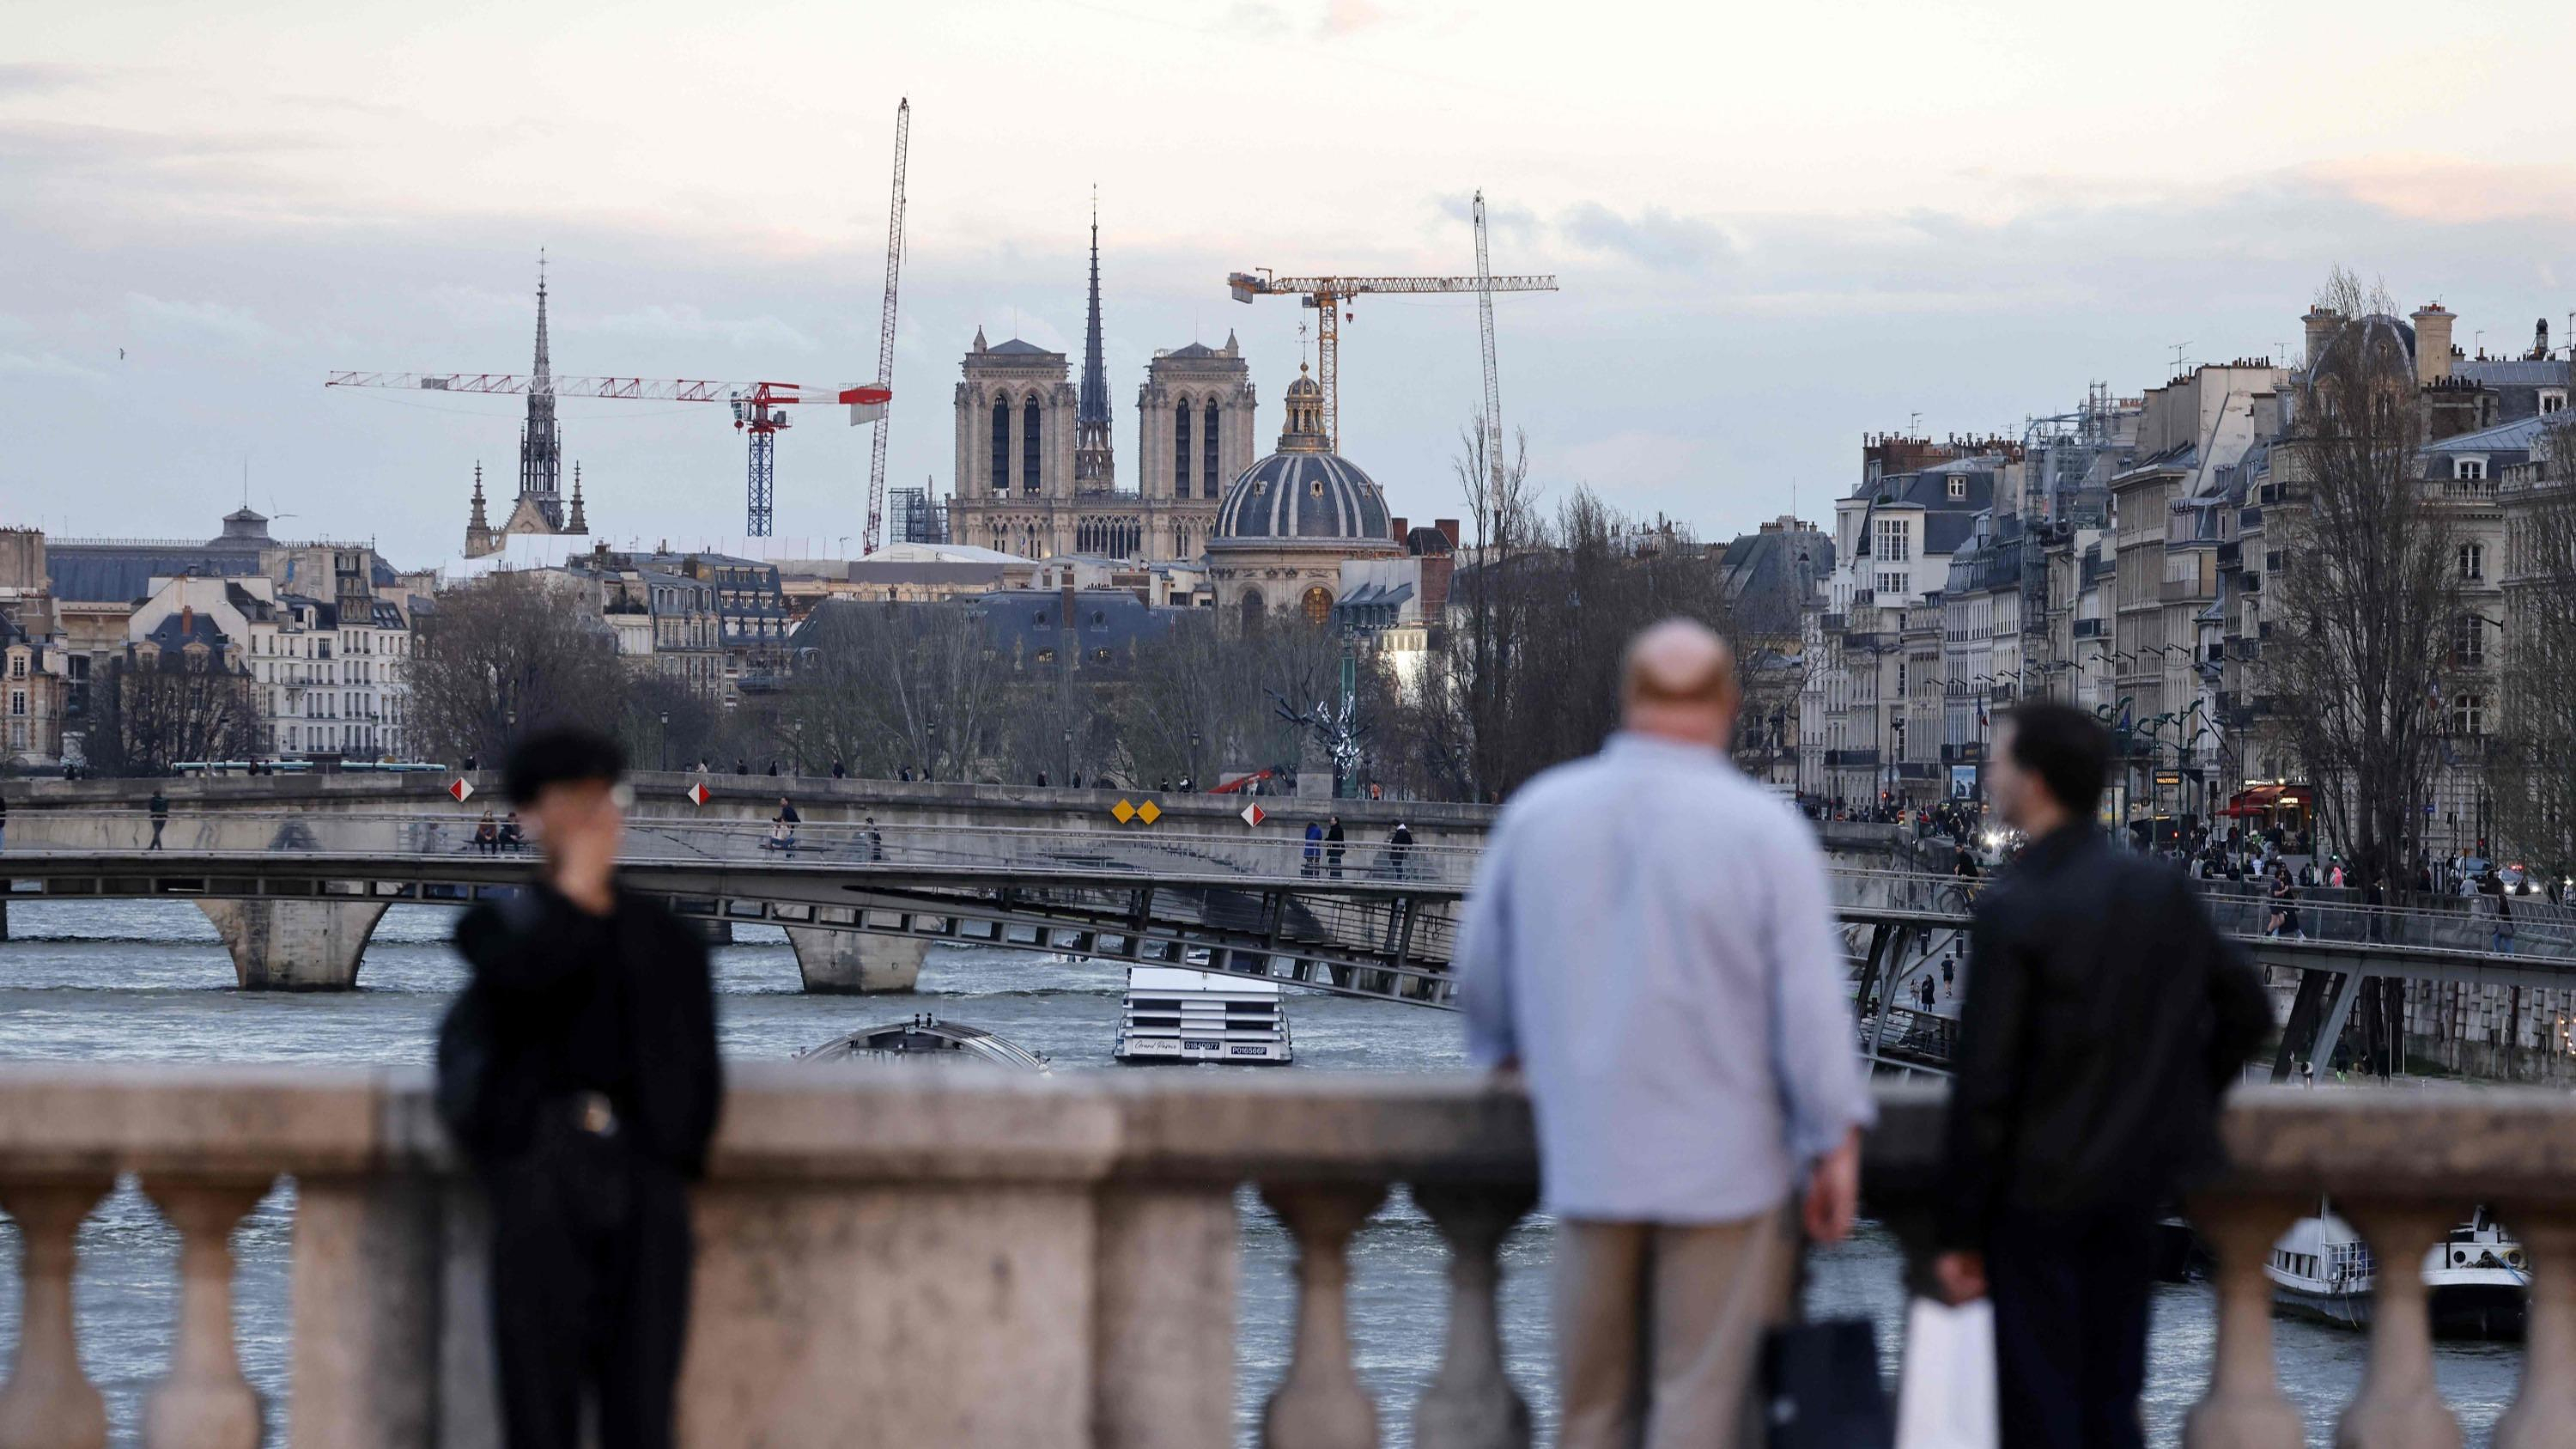 Notre-Dame de Paris: after reopening in December, work will continue